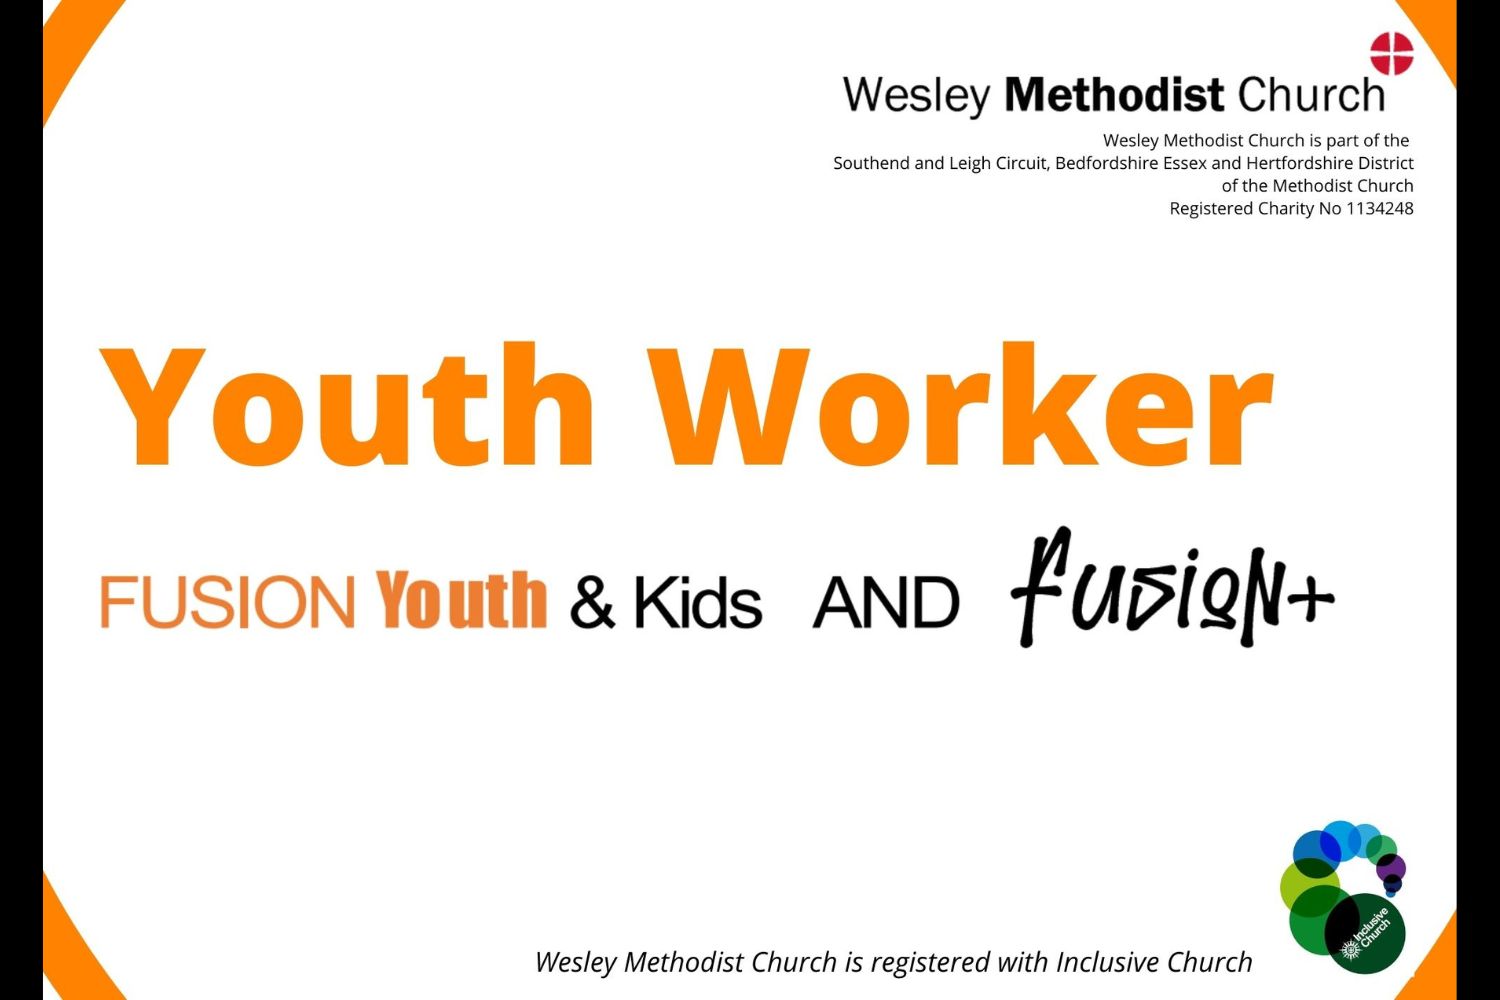 Youth Worker job opportunity at Wesley Methodist Church, Leigh-on-Sea